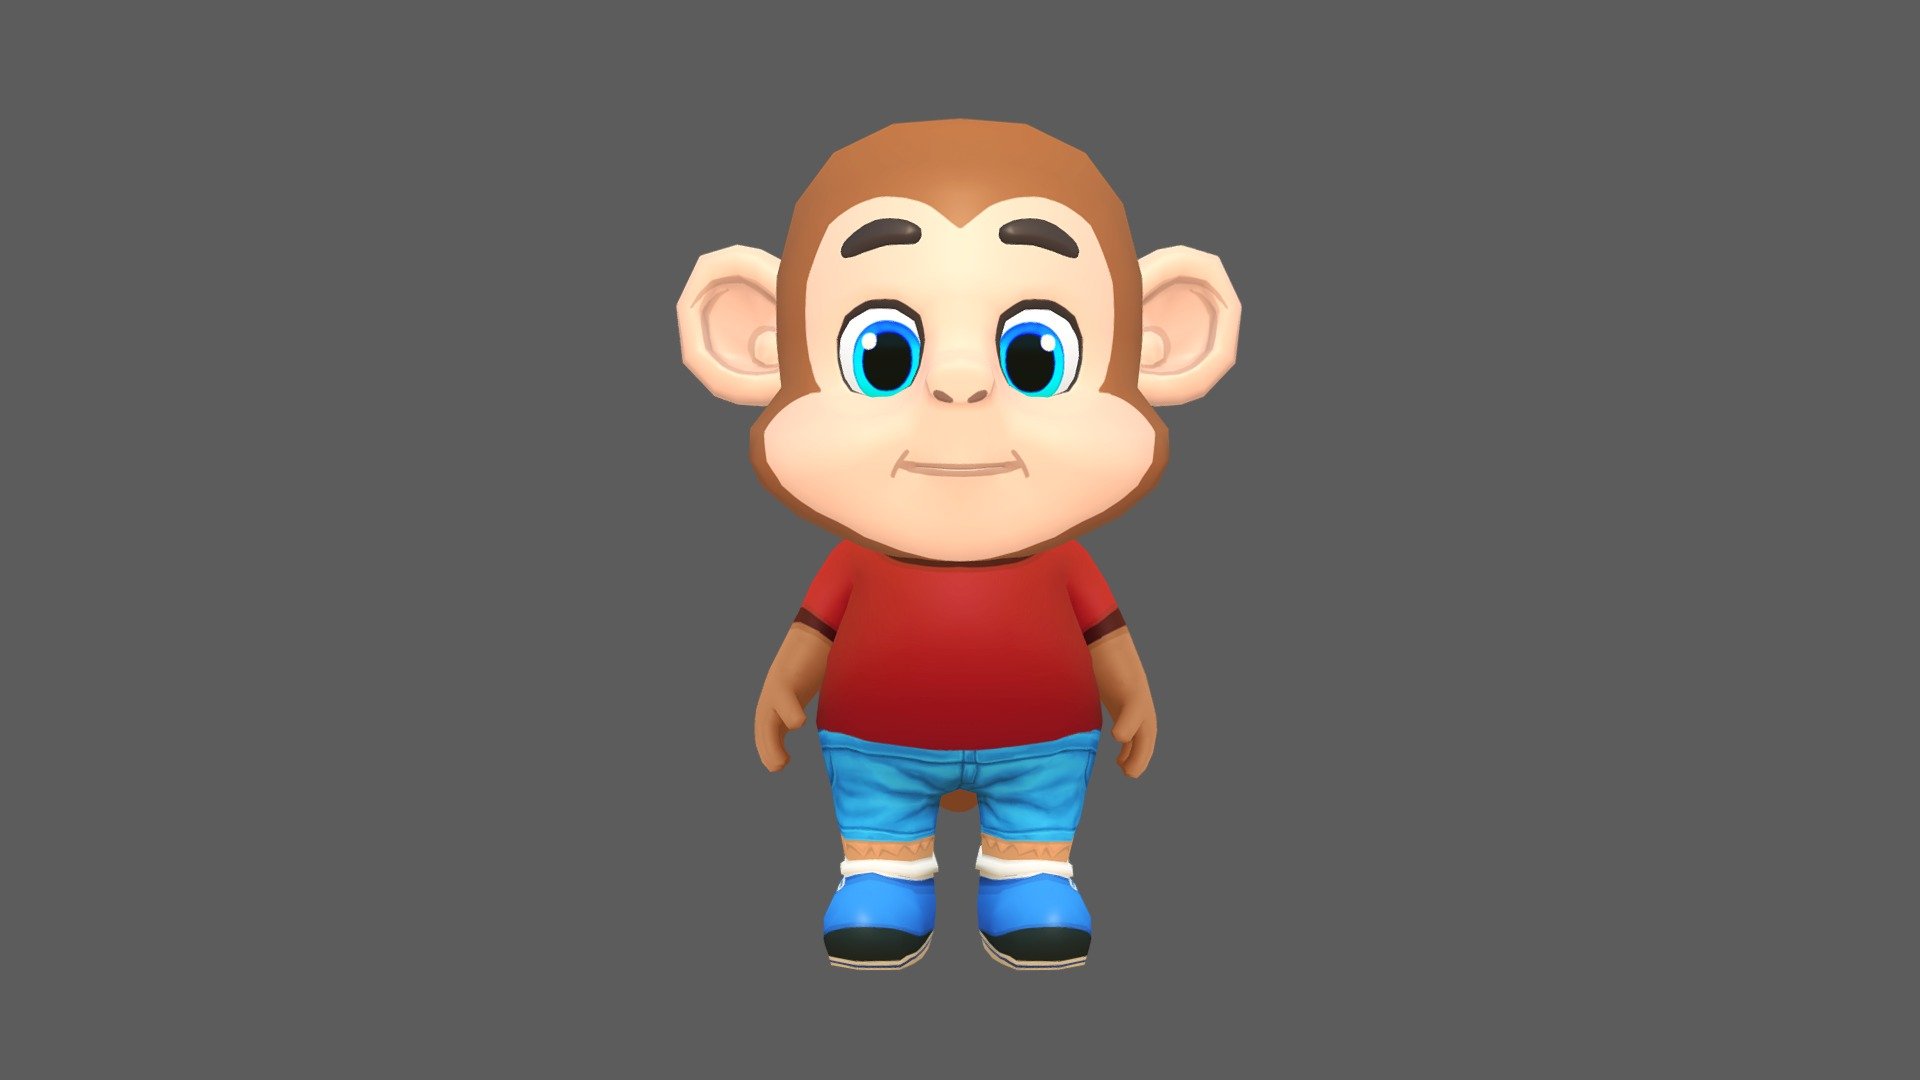 Monkey Chimp character for games and animations. The model is game ready and compatible with game engines.

Included Files:




Maya (Source files, Rig) for Unity and Unreal (.ma, .mb) - 2015 - 2020

FBX for Unity and Unreal - 2014 - 2020

OBJ

Supports Humanoid Animation:




Unity Humanoid compatible.

Mixamo and other humanoid animation libraries (MoCap).

Removable Tail.

Full Facial and Body Rig for further animation.

Lowpoly with four texture resolutions 4096x4096, 2048x2048, 1024x1024 &amp; 512x512.

The package includes 18 Animations:




Run

Idle

Jump

Leap left

Leap right

Skidding

Roll

Crash &amp; Death

Power up

Whirl

Whirl jump

Waving in air

Backwards run

Dizzy

Gum Bubble

Gliding

Waving

Looking behind

The model is fully rigged and can be easily animated in case further animating or modification is required.

The model is game ready at:




3721 Polygons

3706 Vertices

The model is UV mapped with non-overlapping UV's and baked lighting 3d model